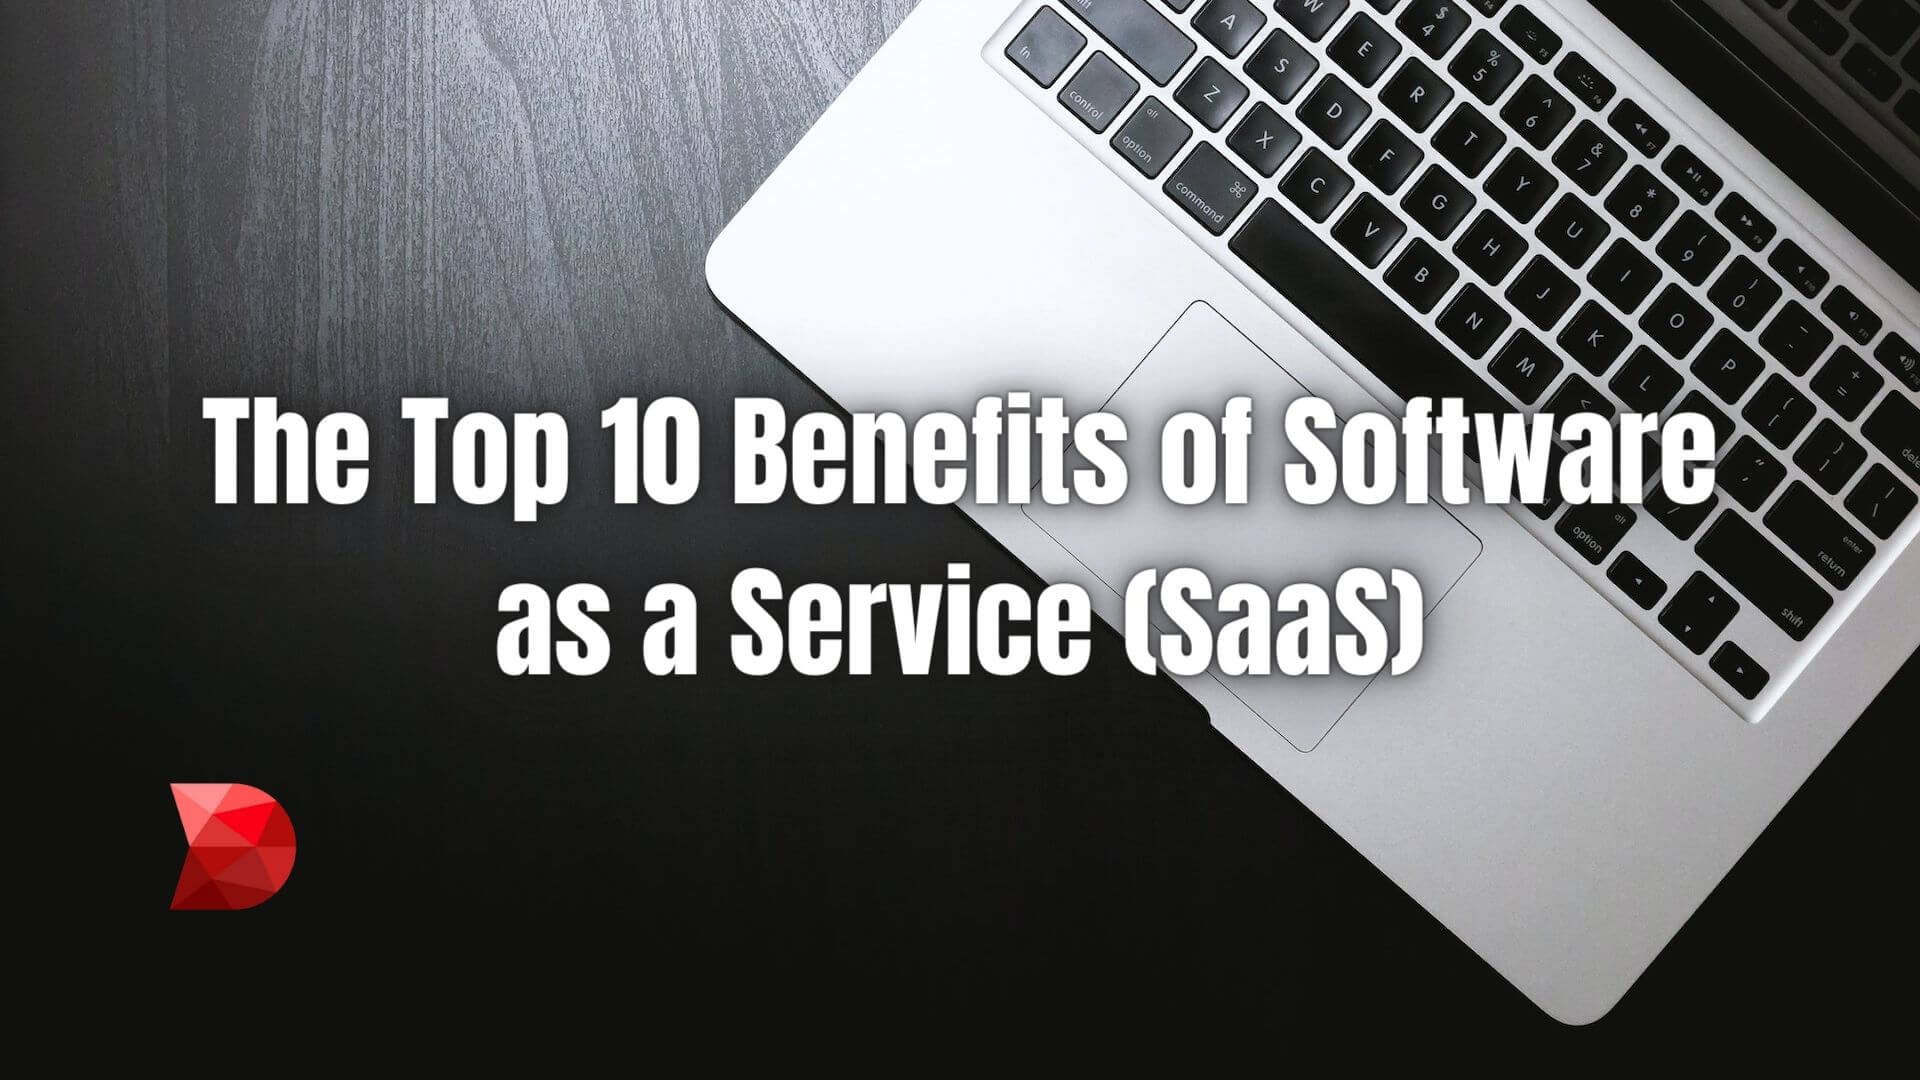 Adopting a SaaS solution can bring amazing benefits to businesses. Learn about the top 10 benefits of SaaS and why it's essential.